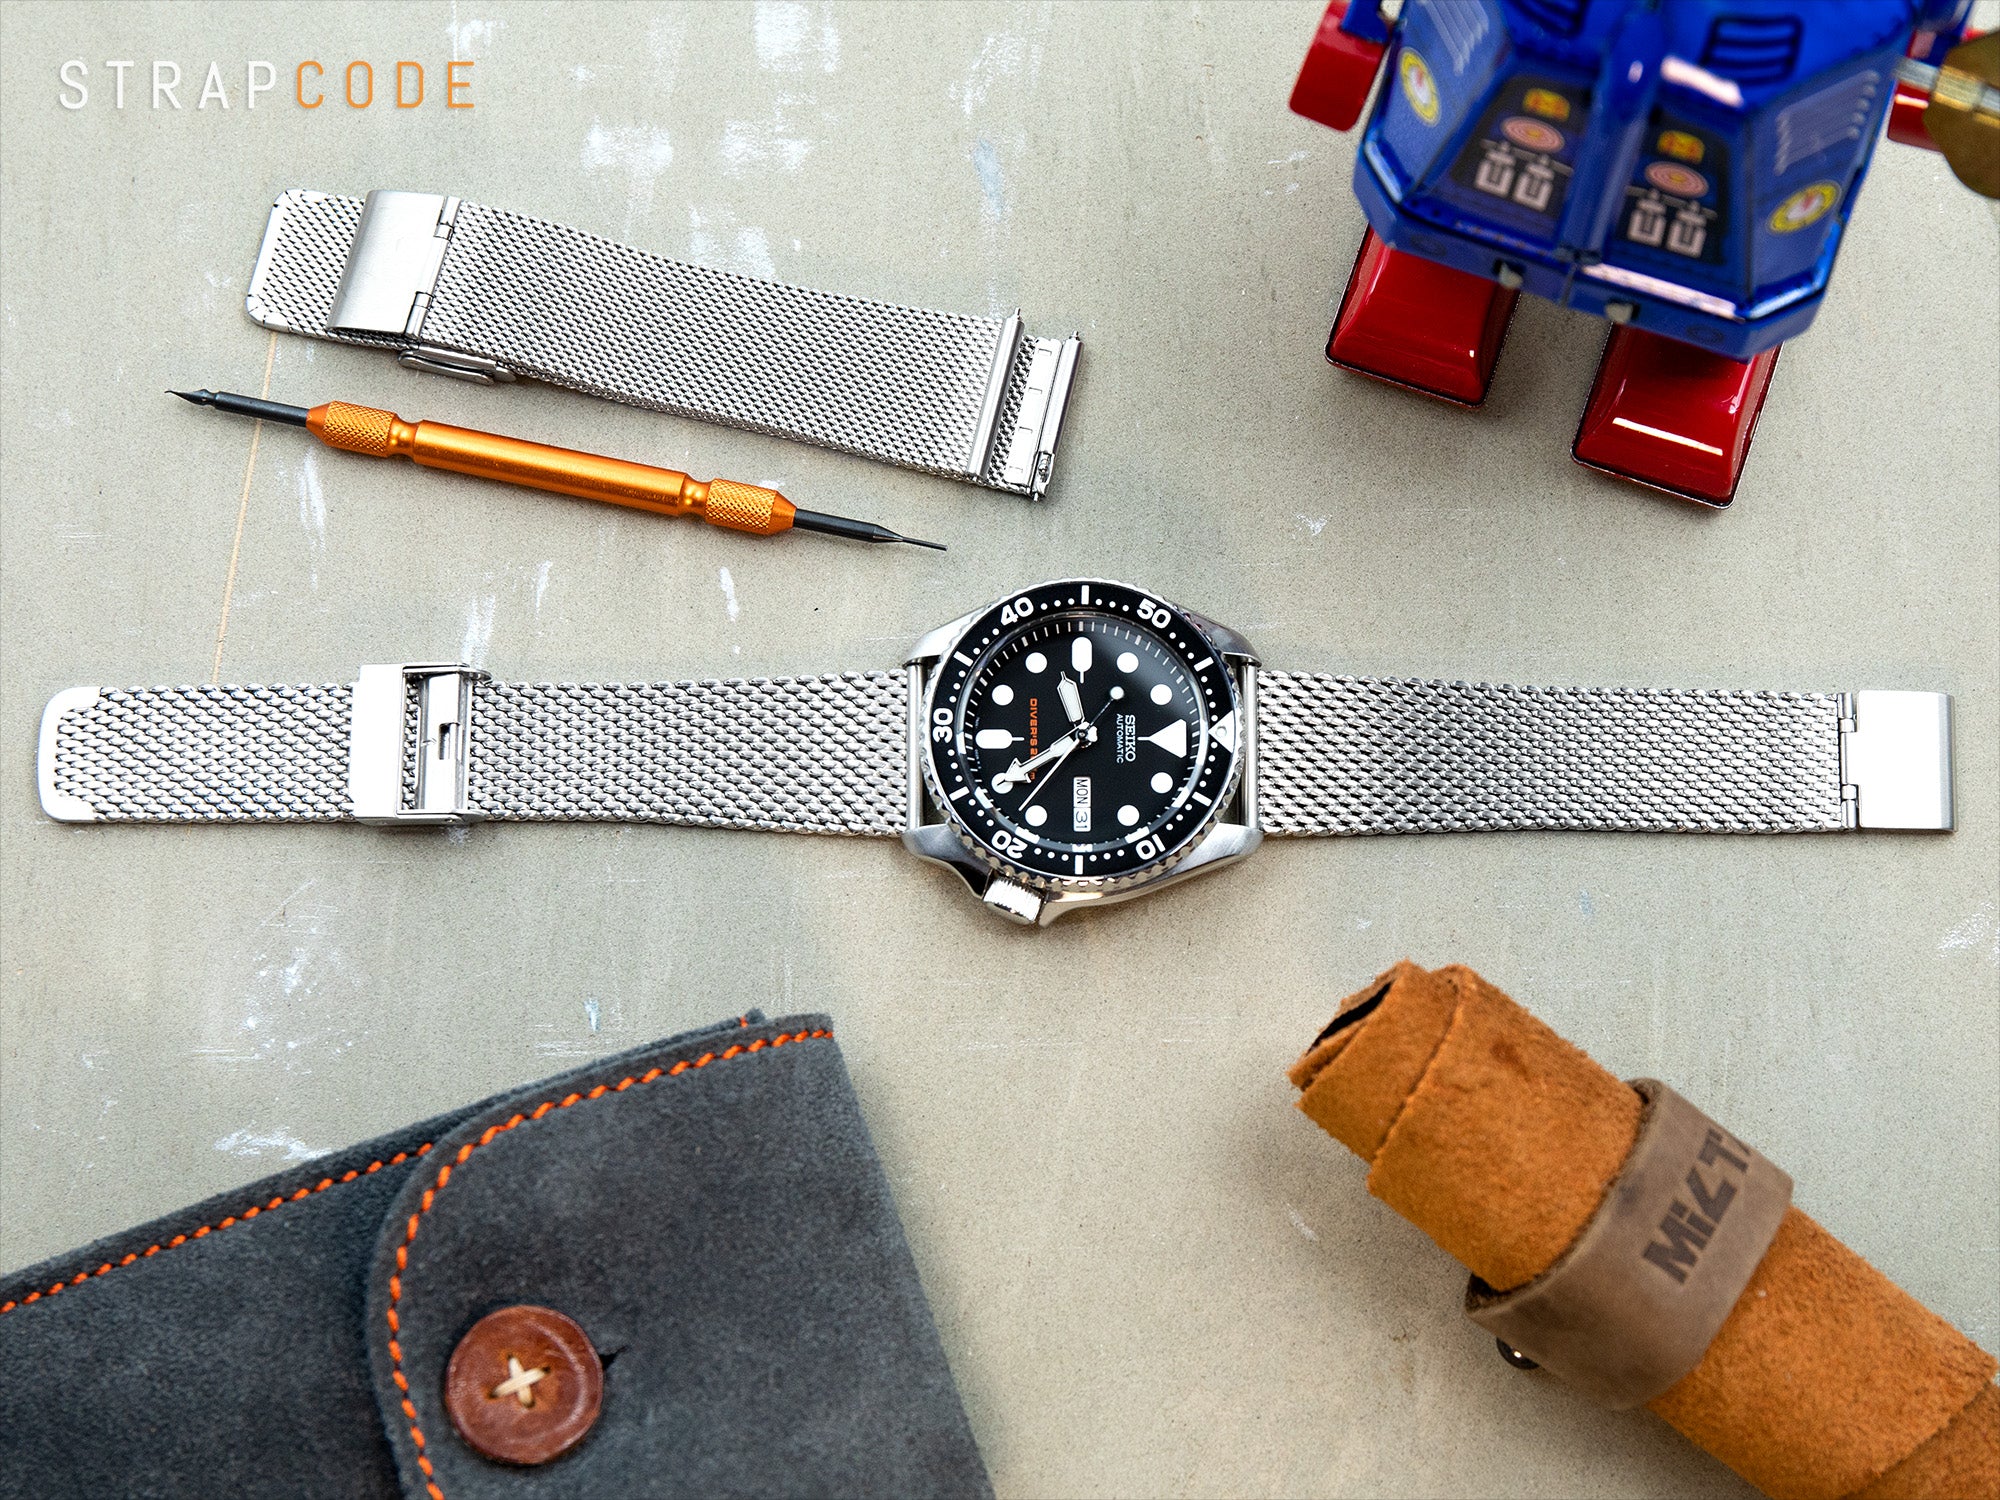 Milanese mesh watch band by Strapcode gives Seiko SKX007 Diver a rugged yet classy look.